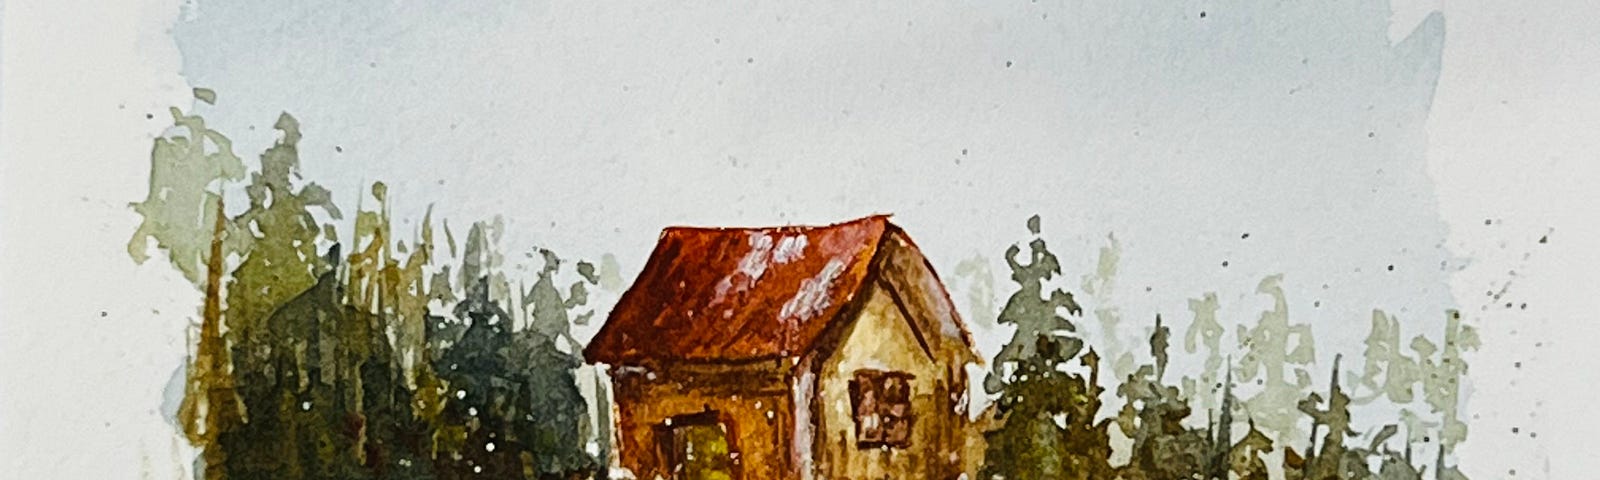 watercolour painting of an imaginary red hut in the wilderness.